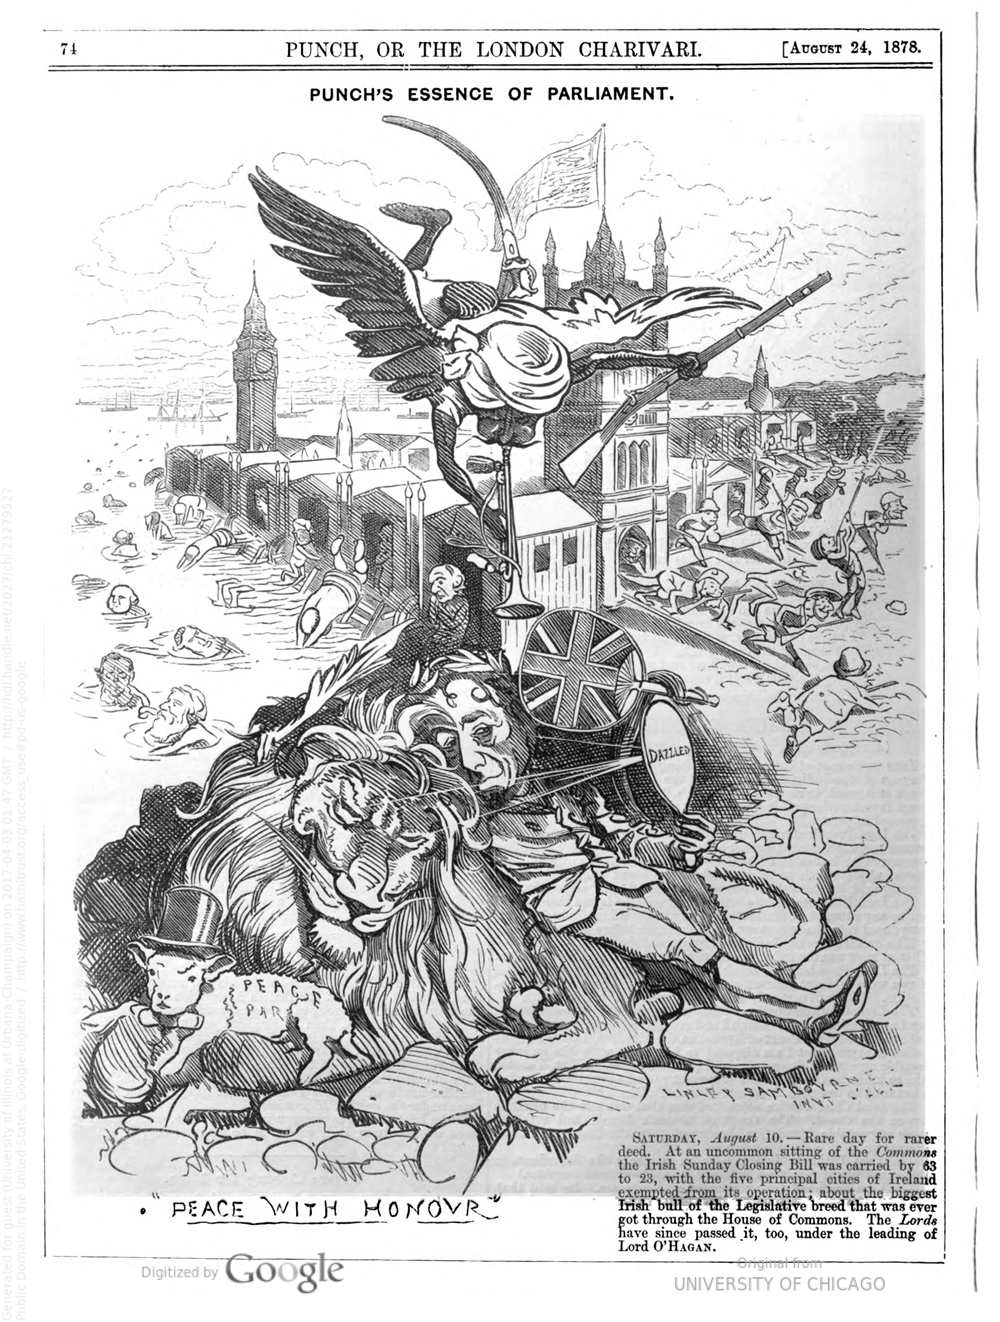 Punch's Essence of Parliament (1878)